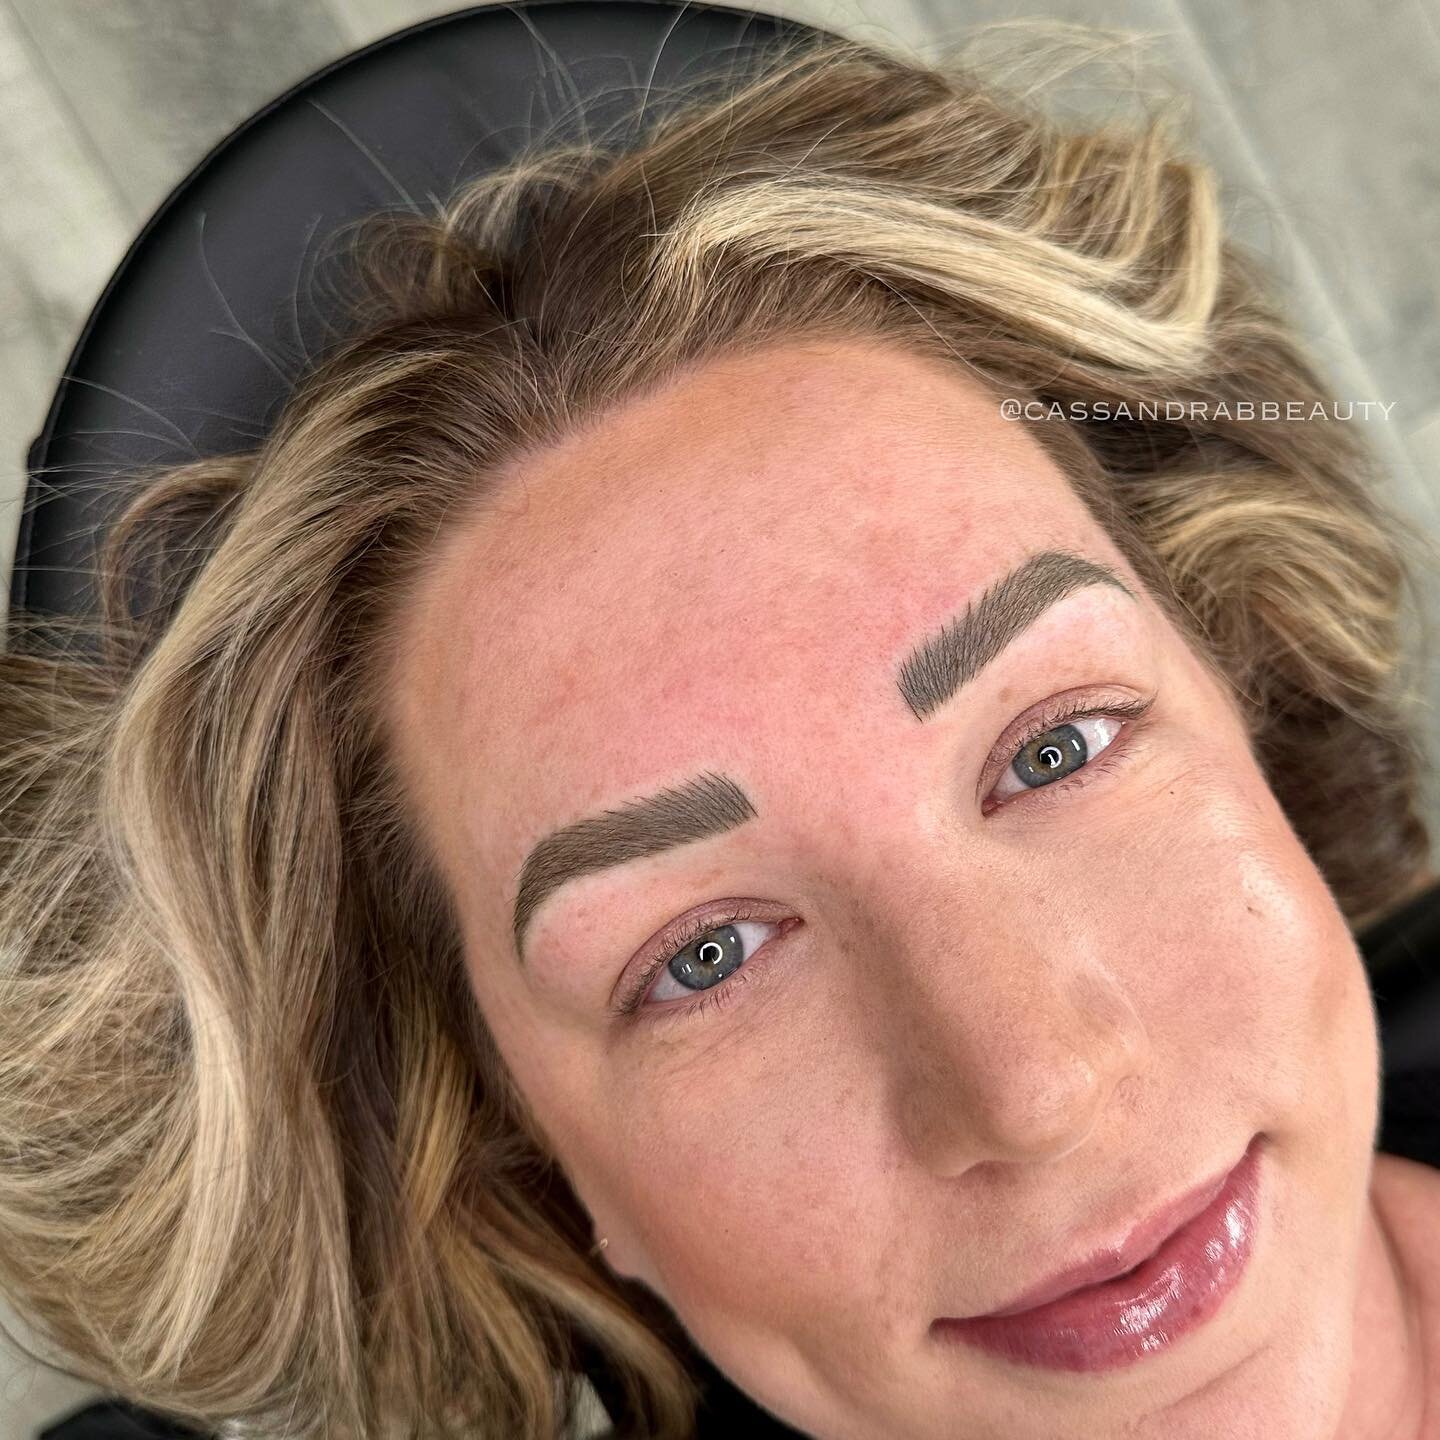 That annual touch up refreshhh 🖋️✨
-
Spring availability is going fast!! Don&rsquo;t procrastinate and miss out 🌼
.
.
.
.
#Langleybrows #surreybrows #cloverdalebrows #langleymicroblading #microbladinglangley #cloverdalemicroblading #microbladingclo